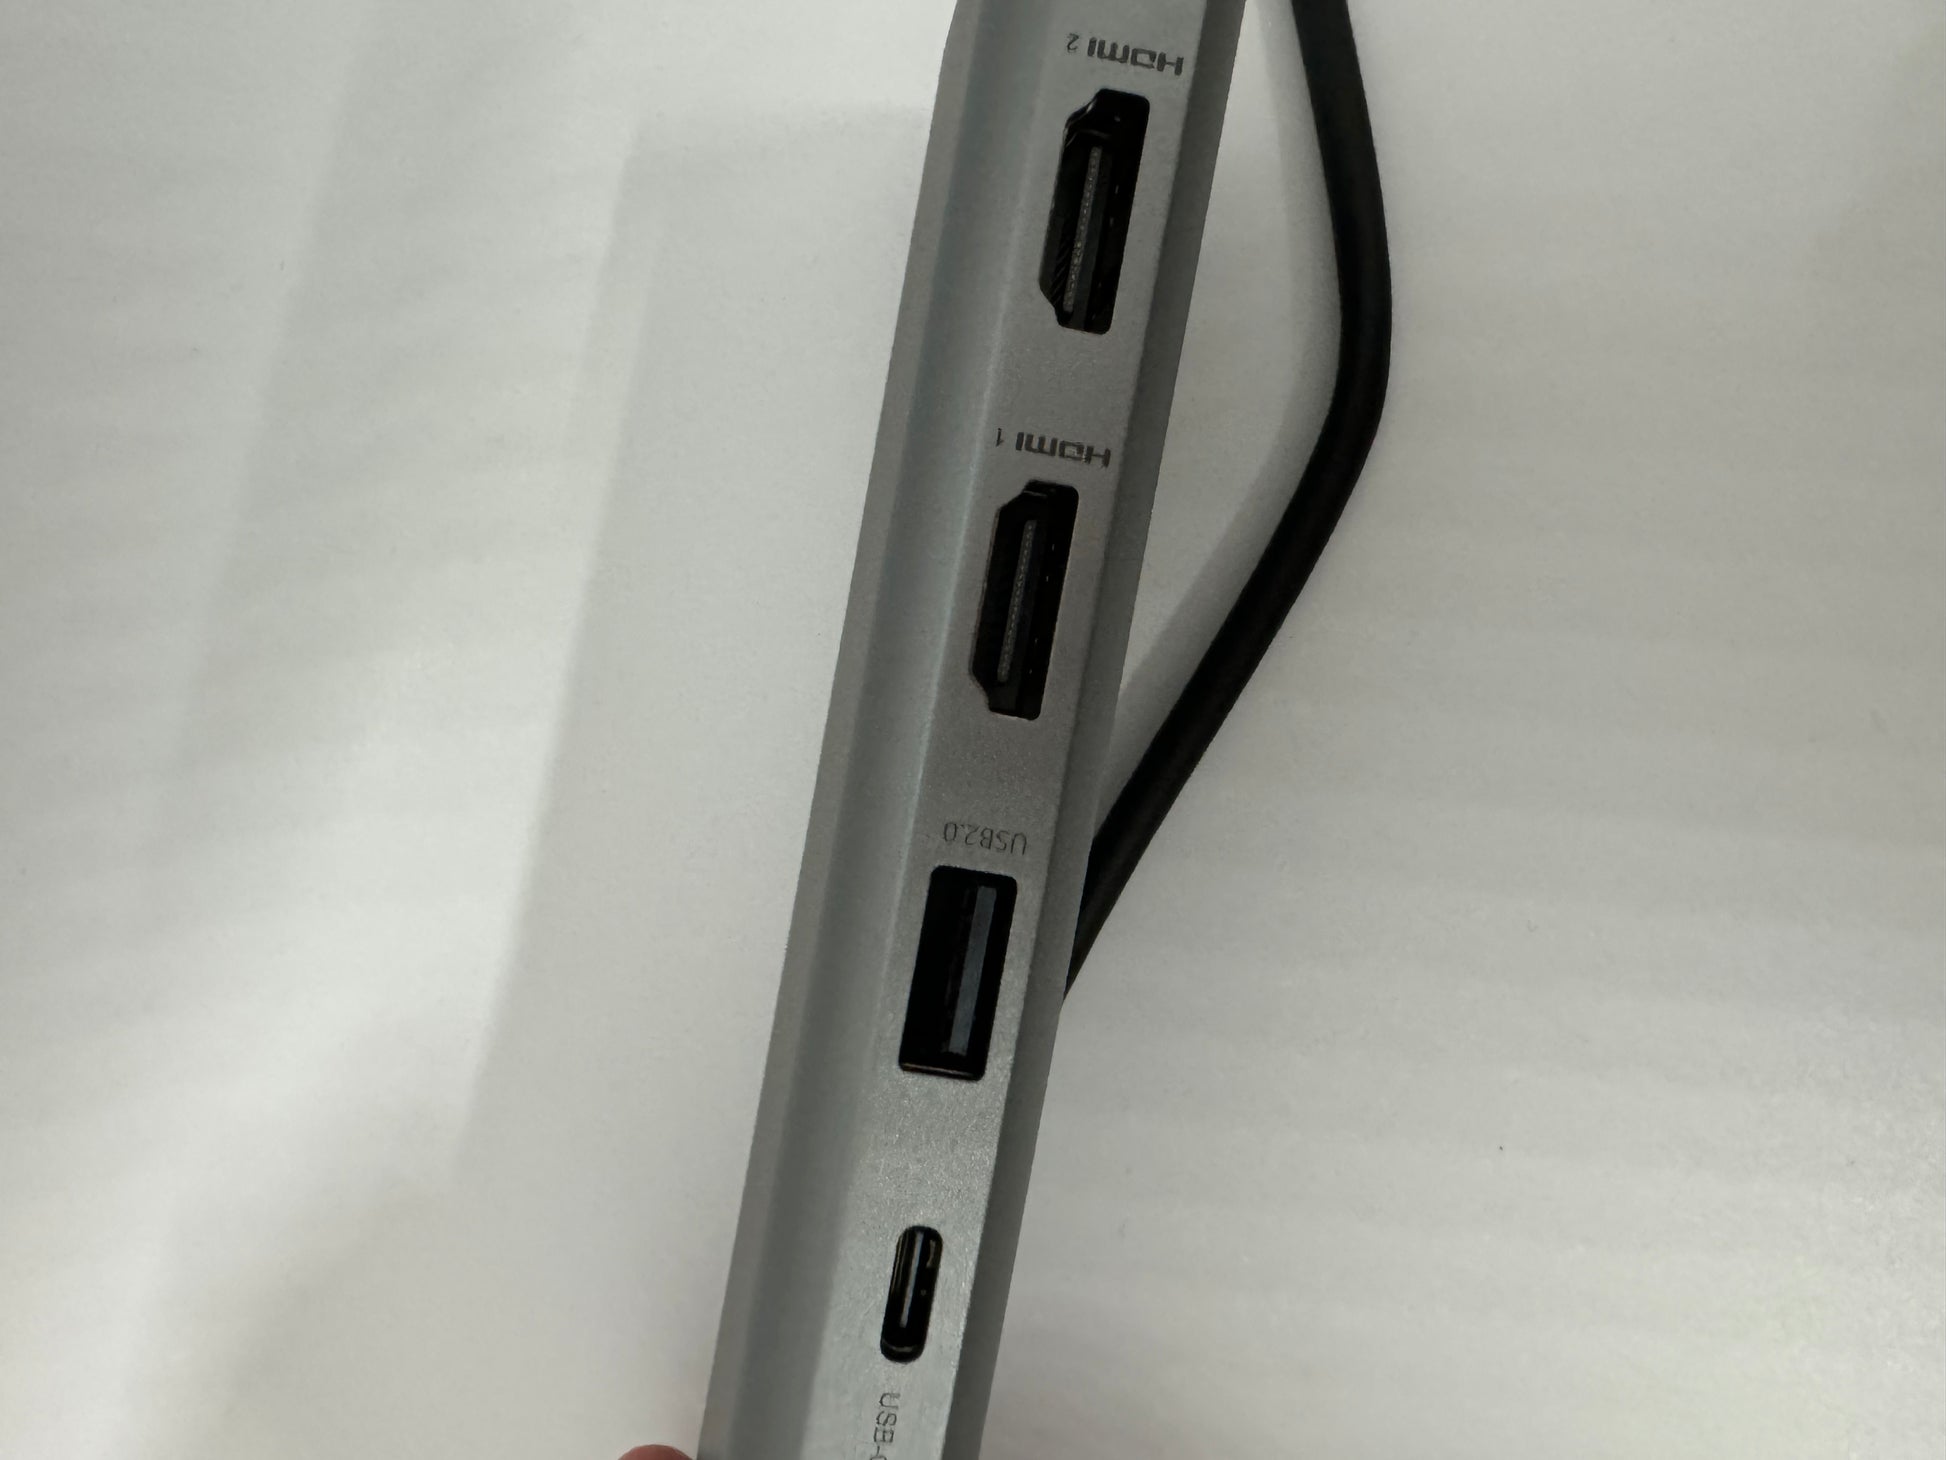 The picture shows a close-up of the side of a device, possibly a laptop or a hub, with multiple ports. The device is silver in color. There are three ports visible in the picture:1. The top port is labeled "HDMI" and appears to be an HDMI port.2. The middle port is also labeled "HDMI".3. The bottom port is labeled "USB" and appears to be a USB-C port.There is also a black cable running diagonally across the picture, but it's not connected to the device. The background is white.